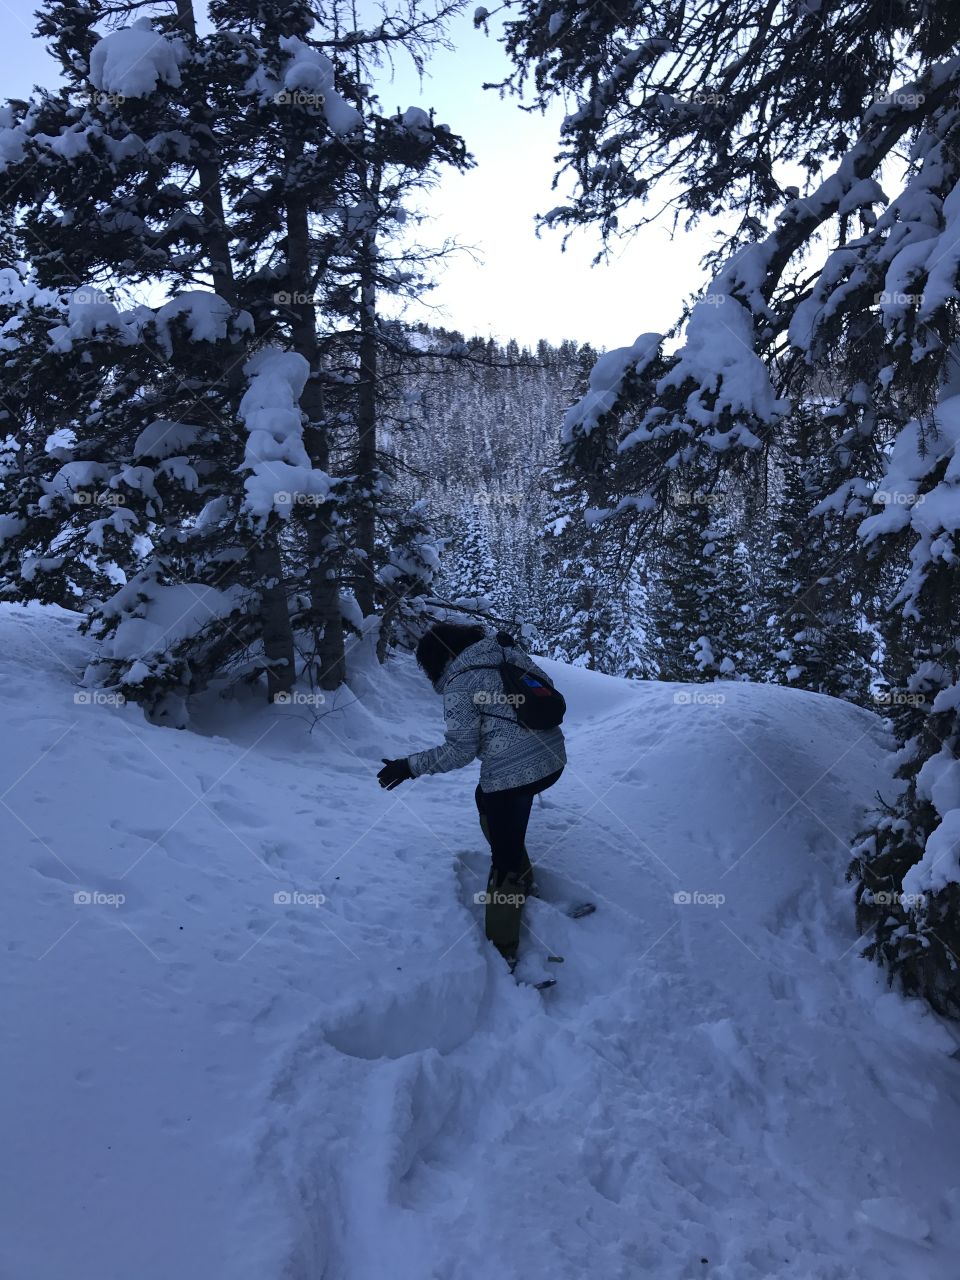 Snowshoeing the untraveled path